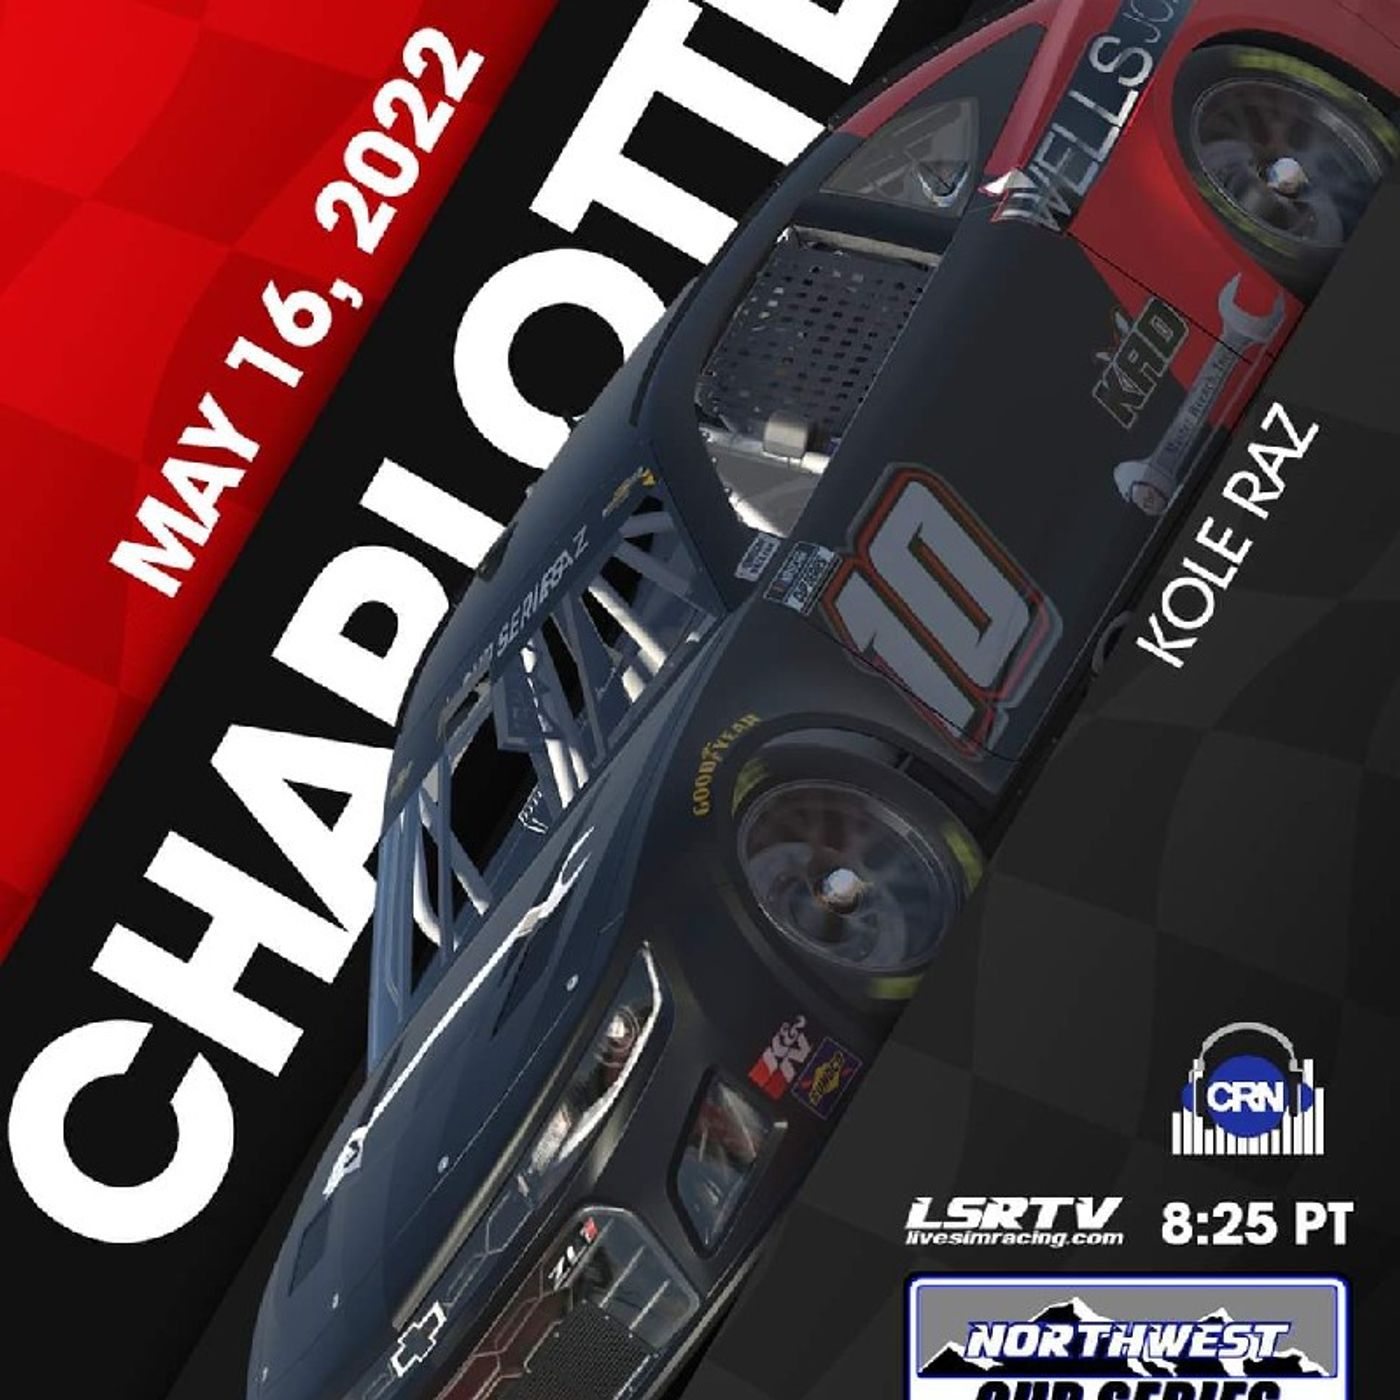 Northwest iRacing Cup Series Round #10 at the virtual Charlotte Motor Speedway! #WeAreCRN #CRNeSports